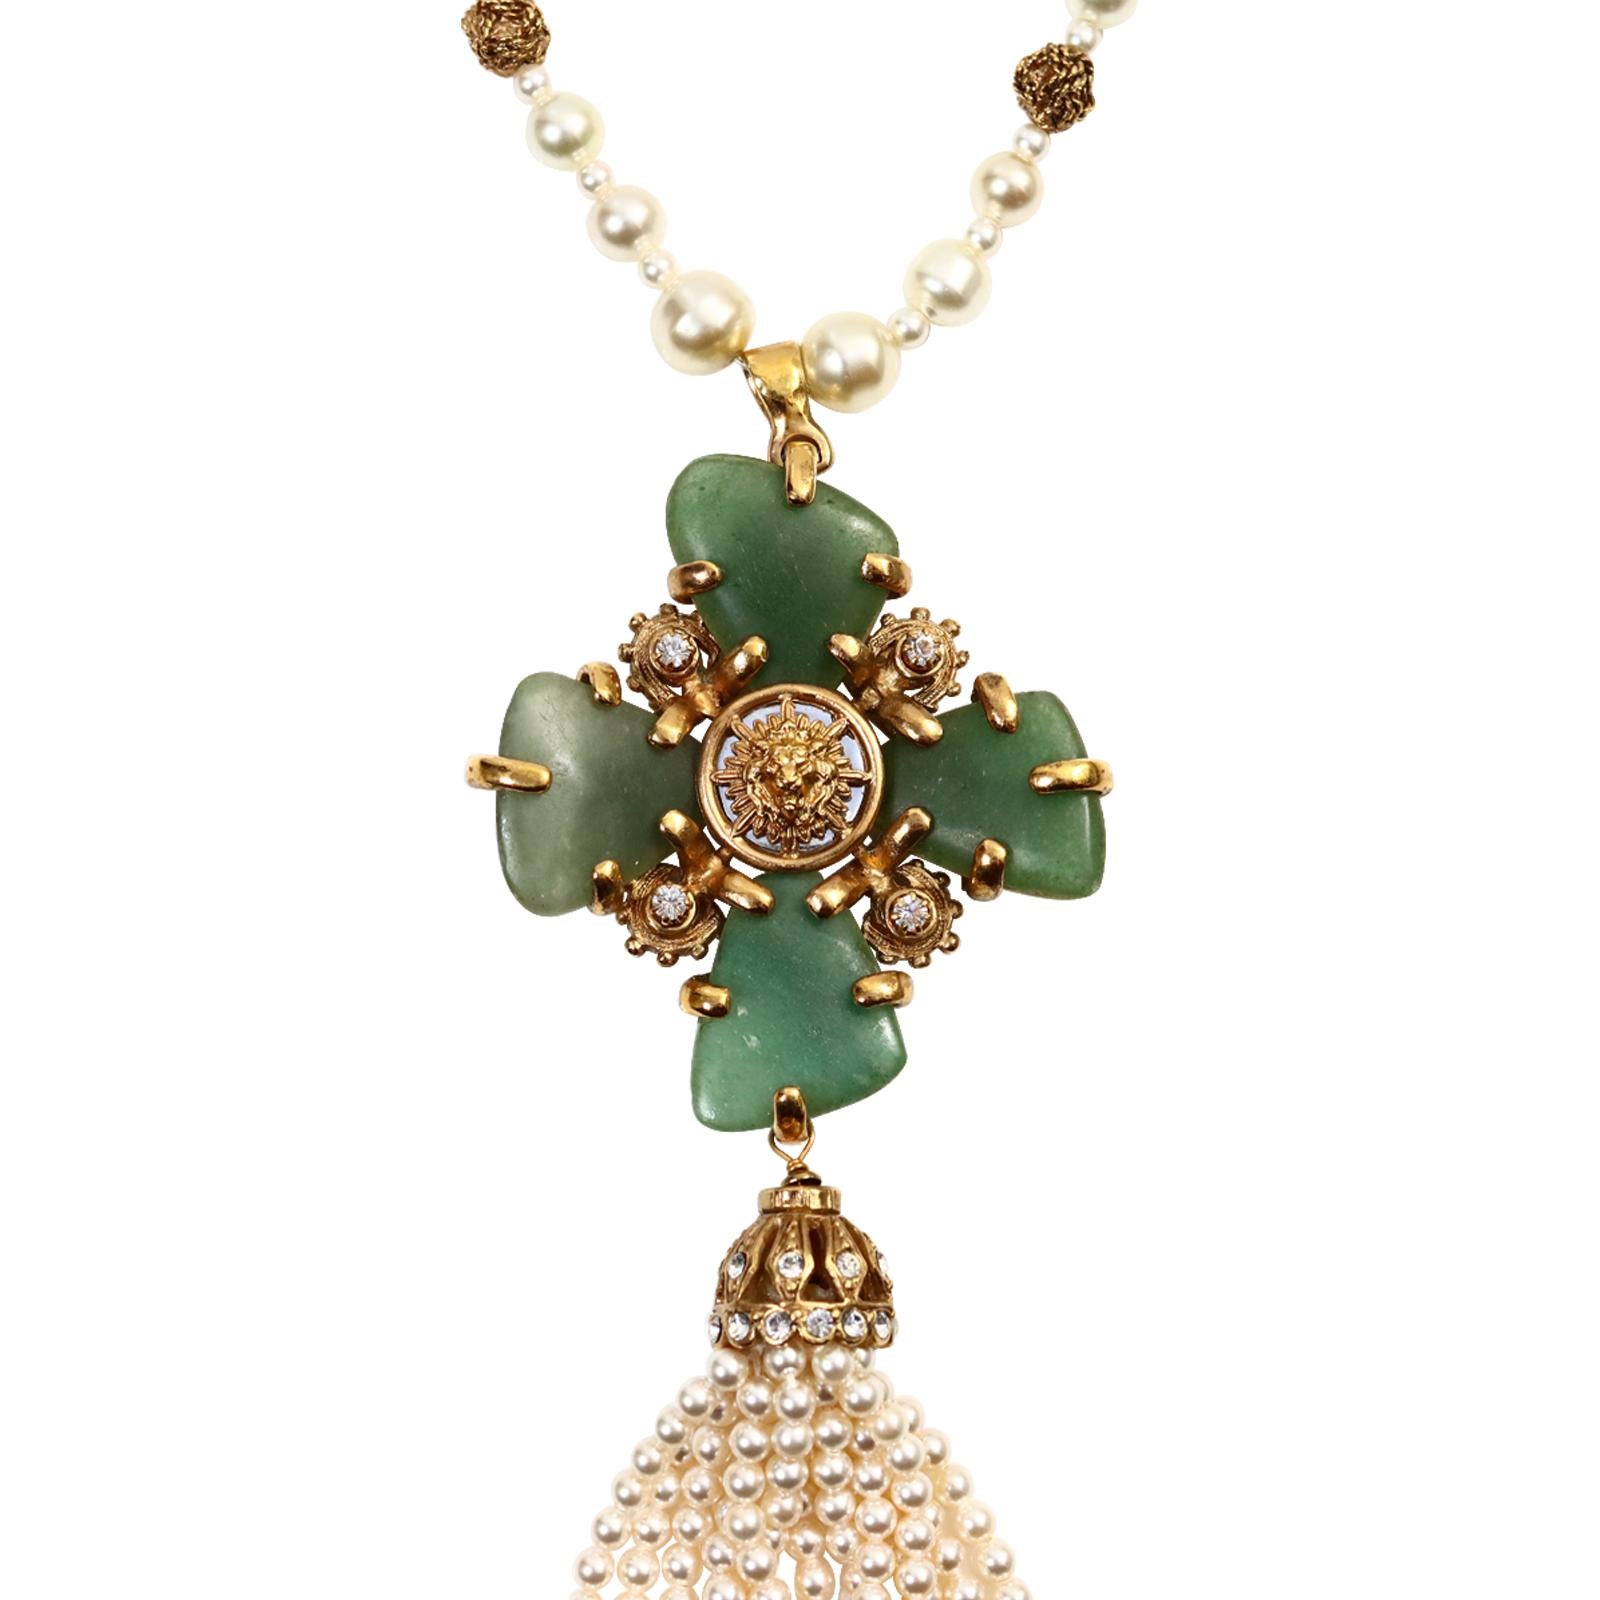 Collectible Chanel Couture Pearl with Green Cross and Dangling Pearls Circa 2005 For Sale 9